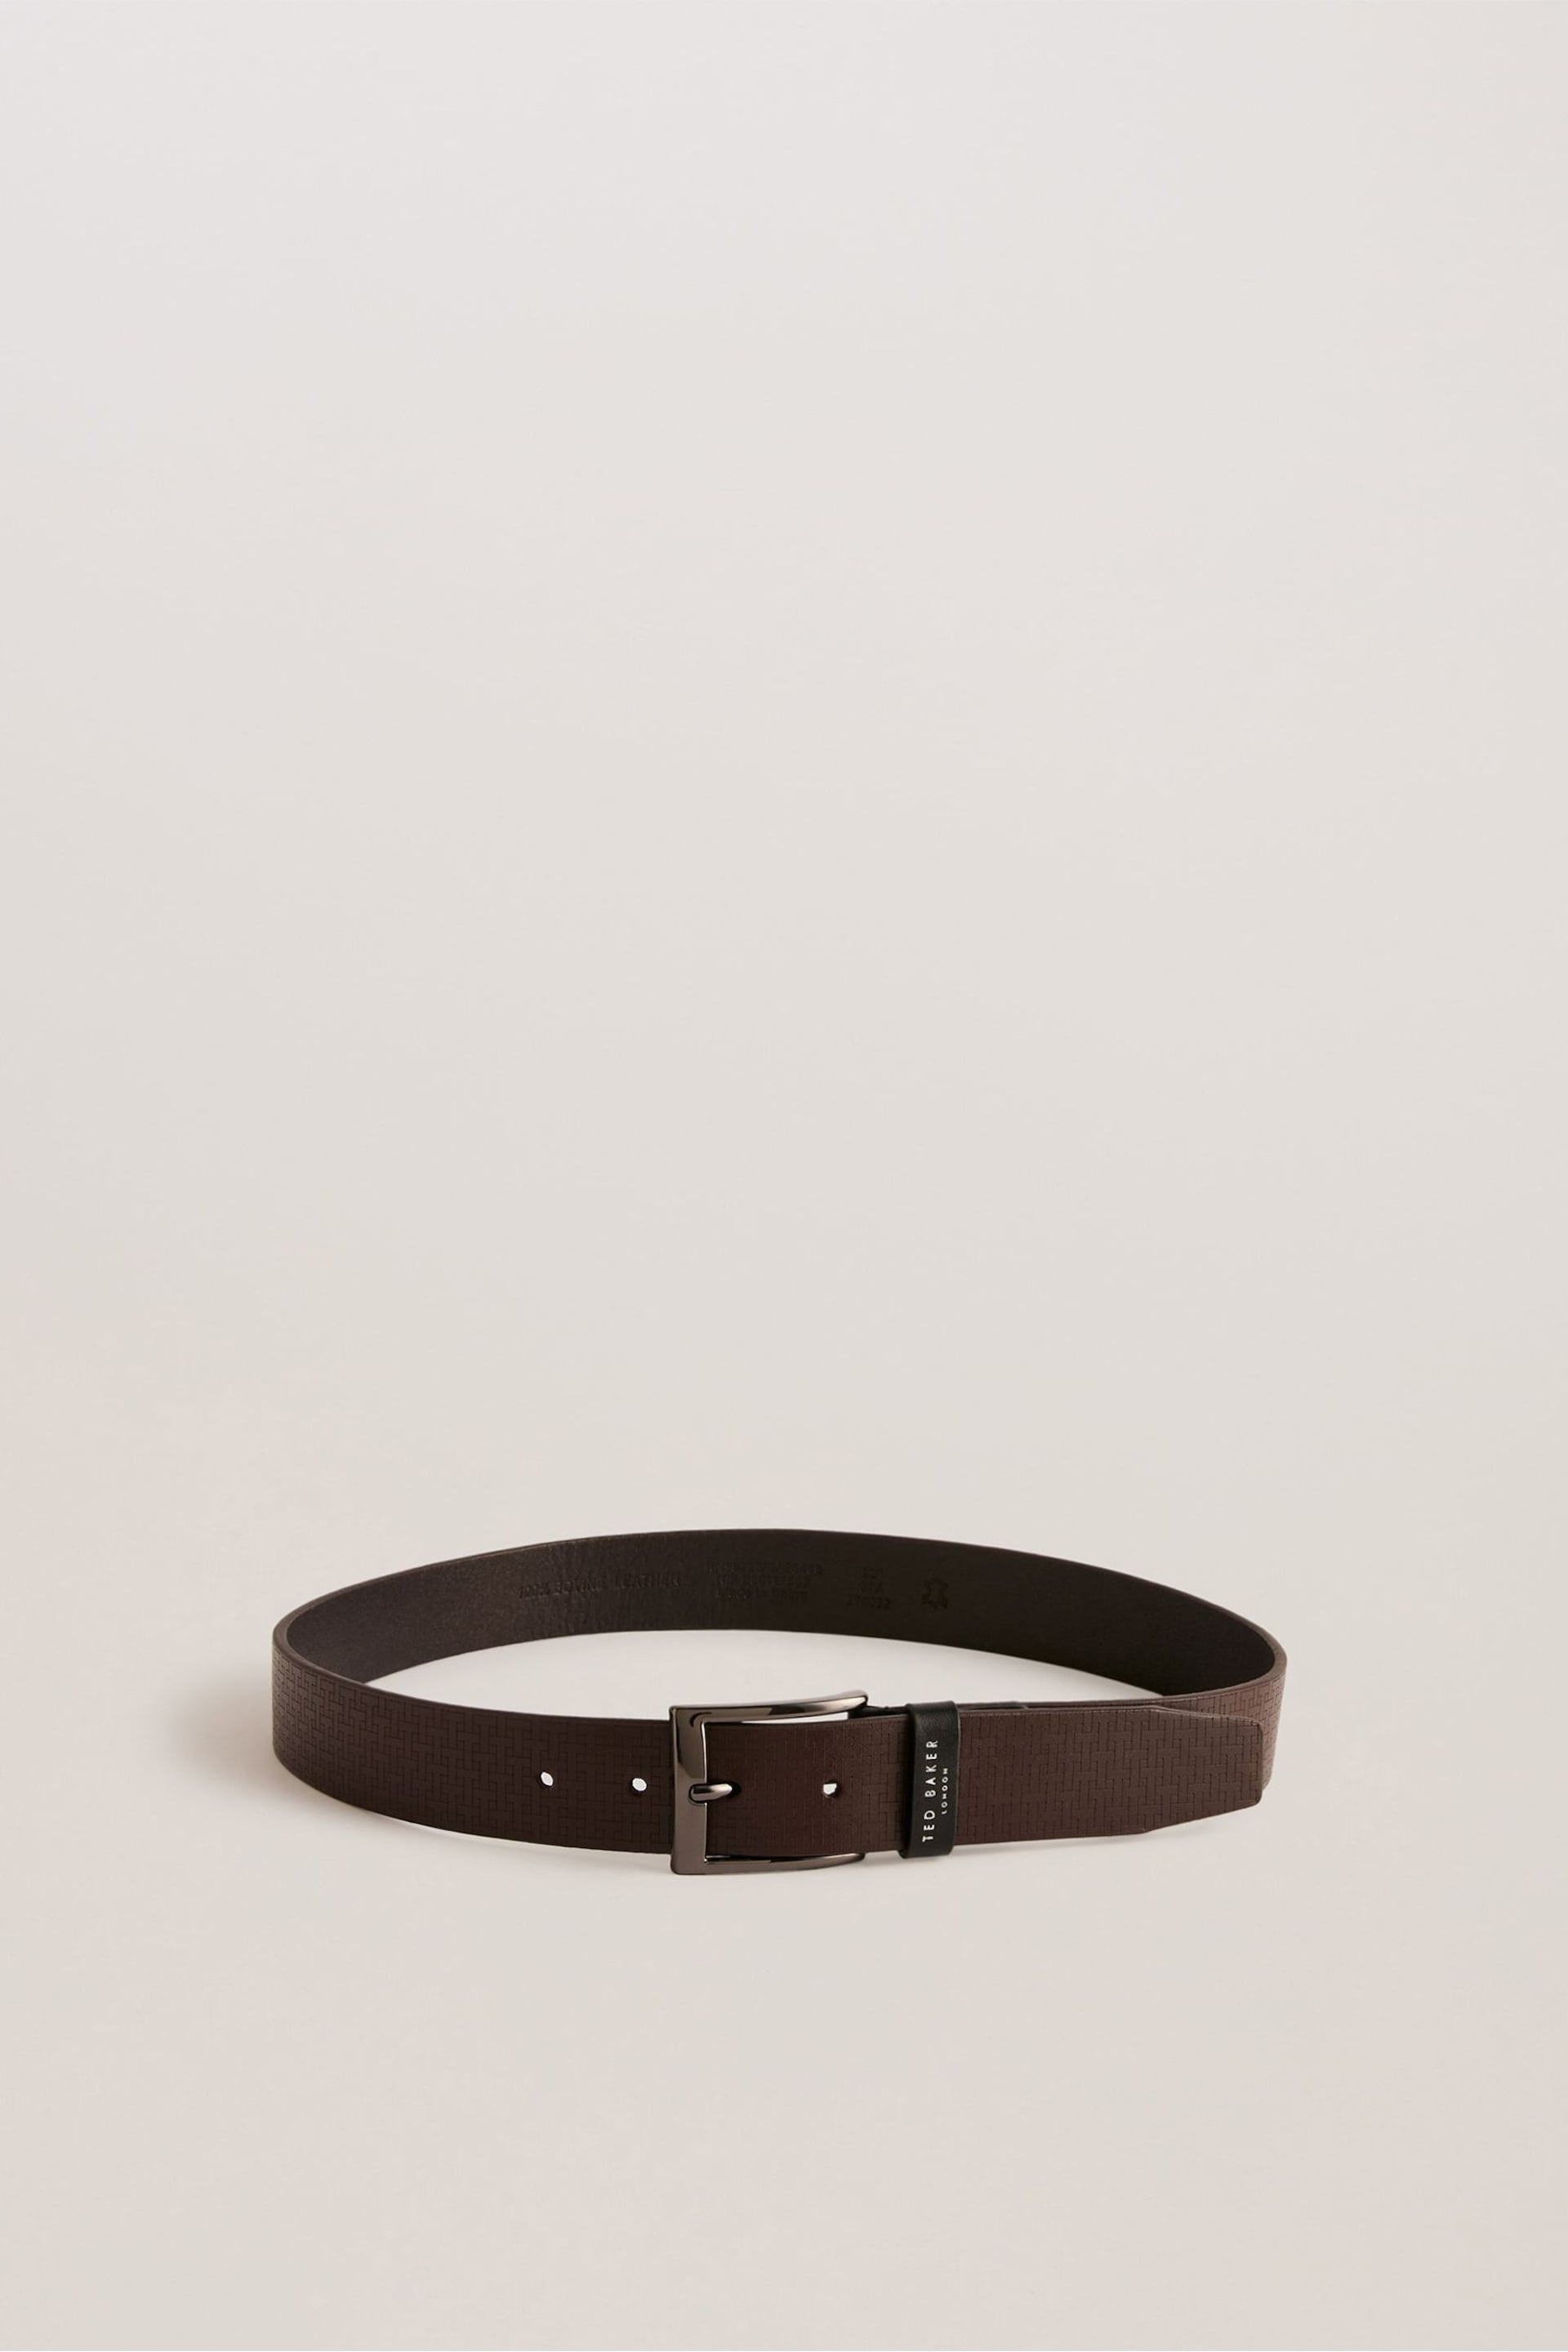 Ted Baker Black Hady T Etched Leather Belt - Image 1 of 4